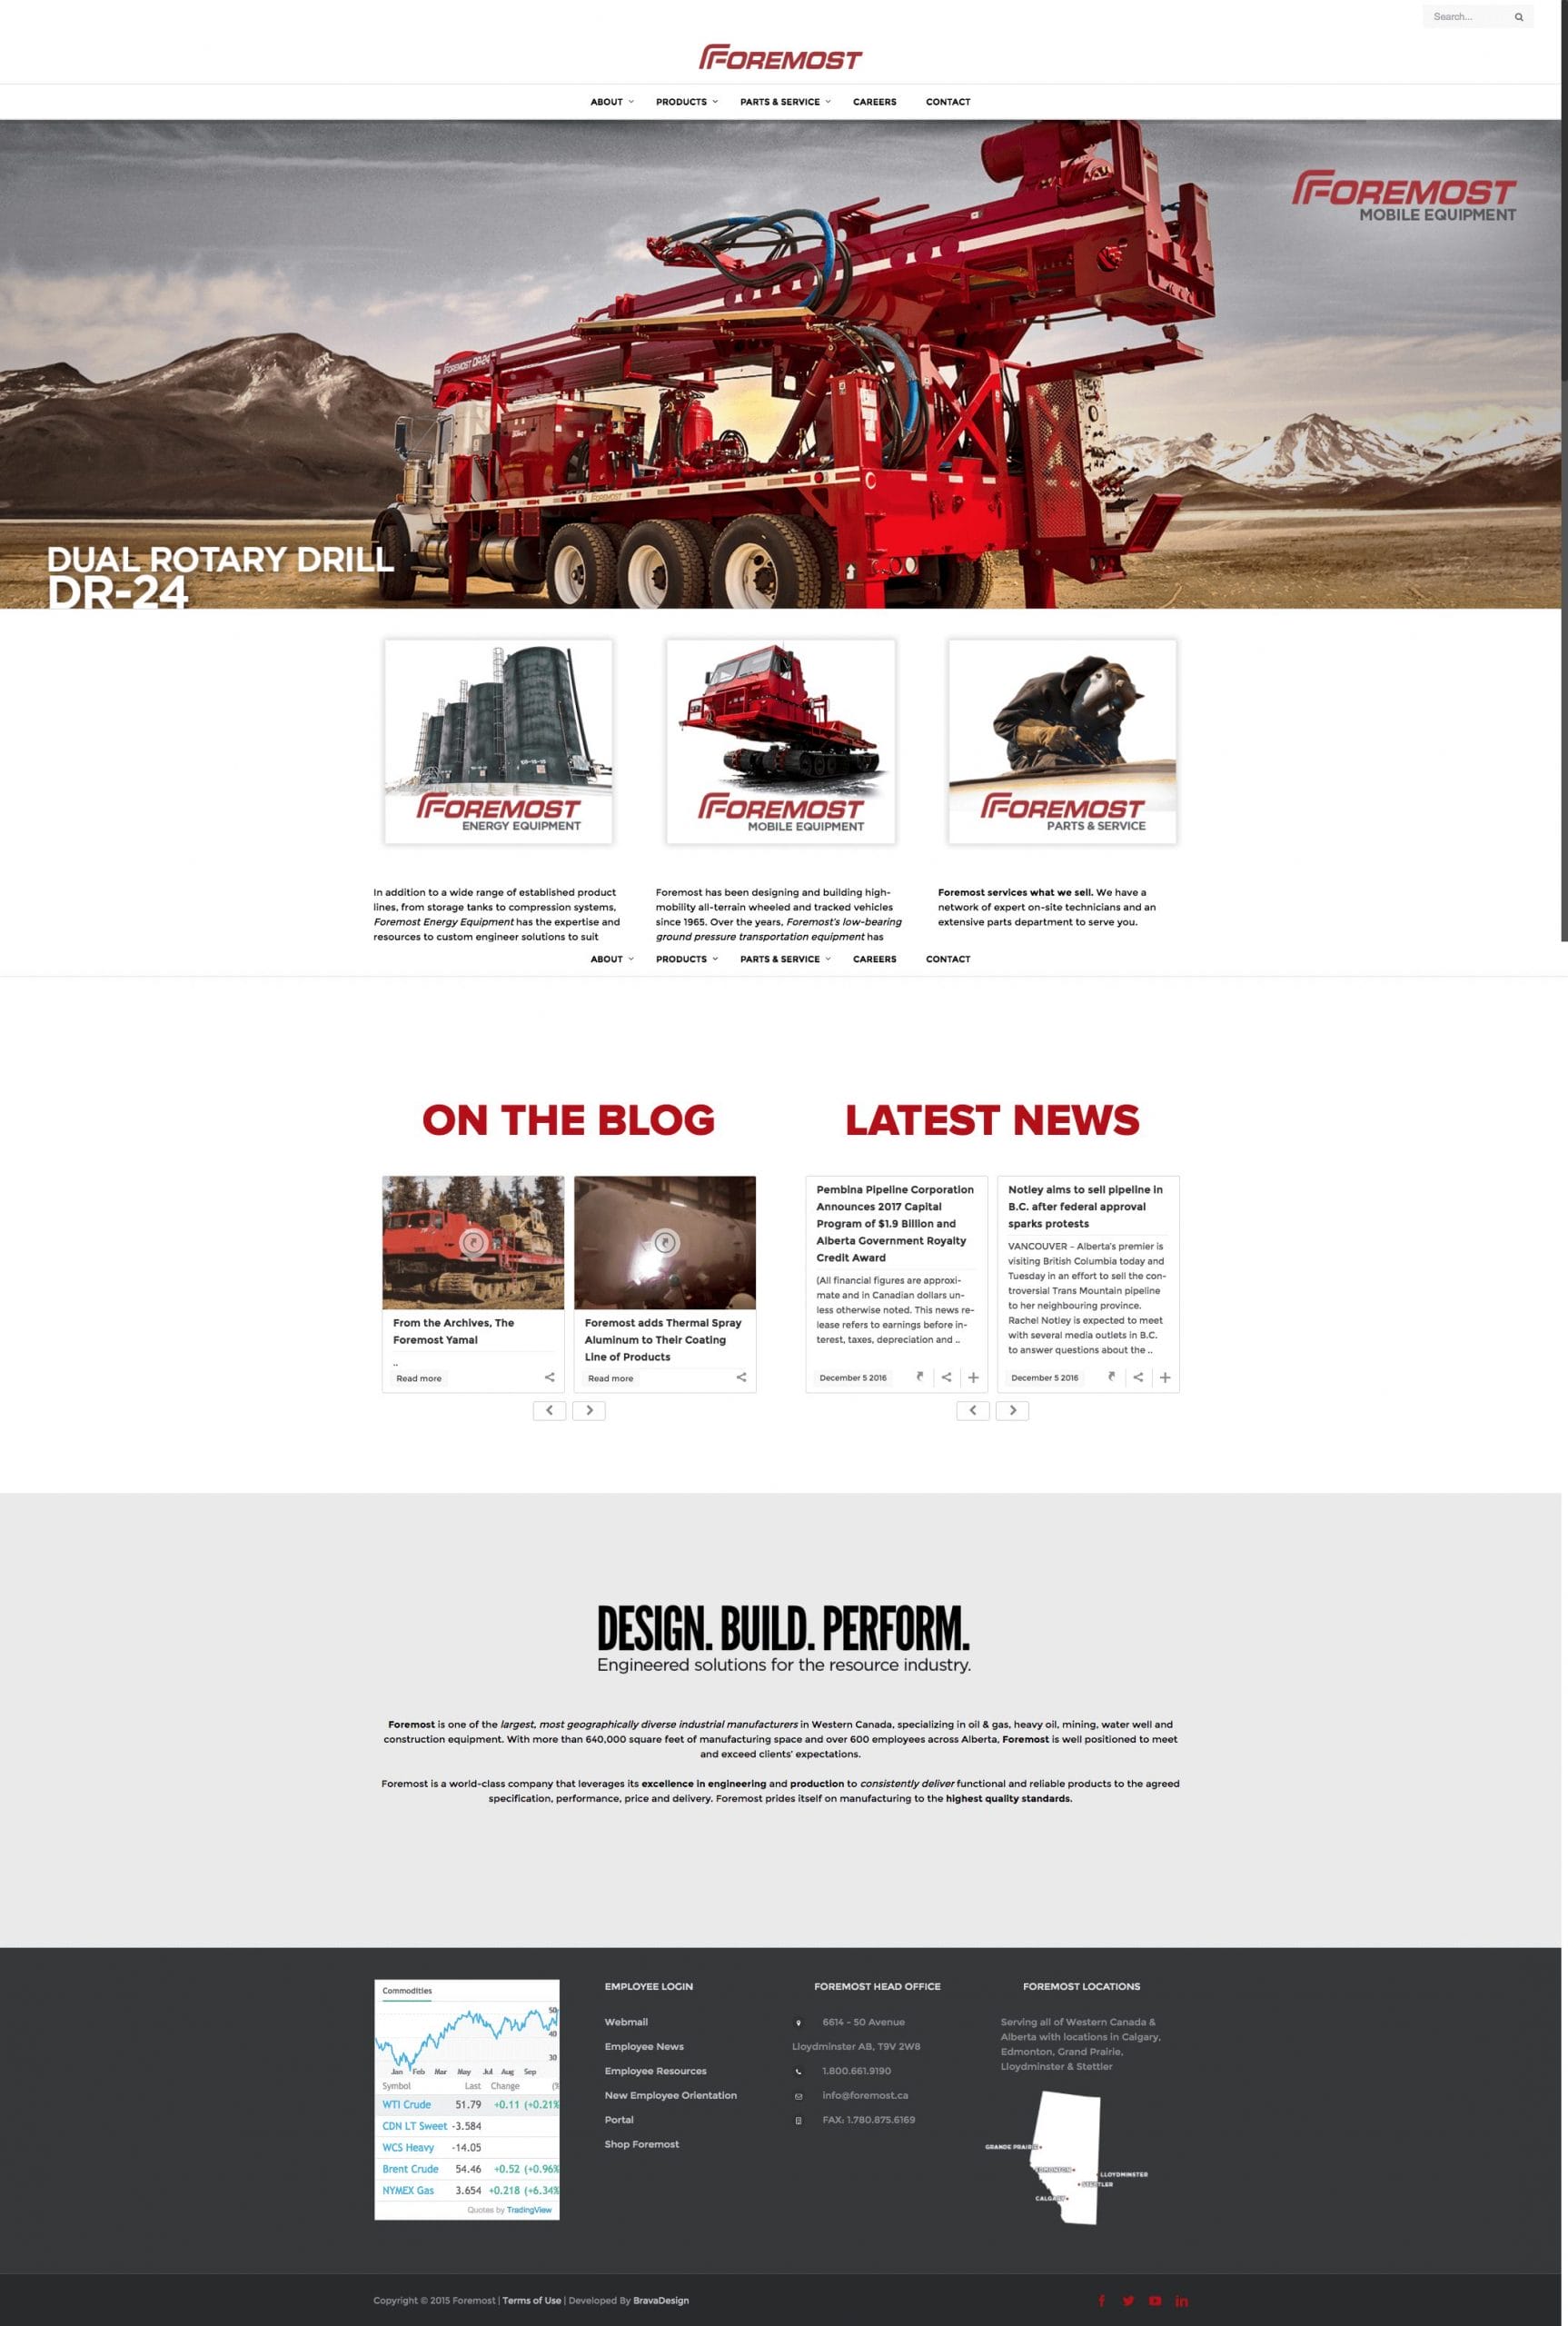 Website design project - foremost full page design